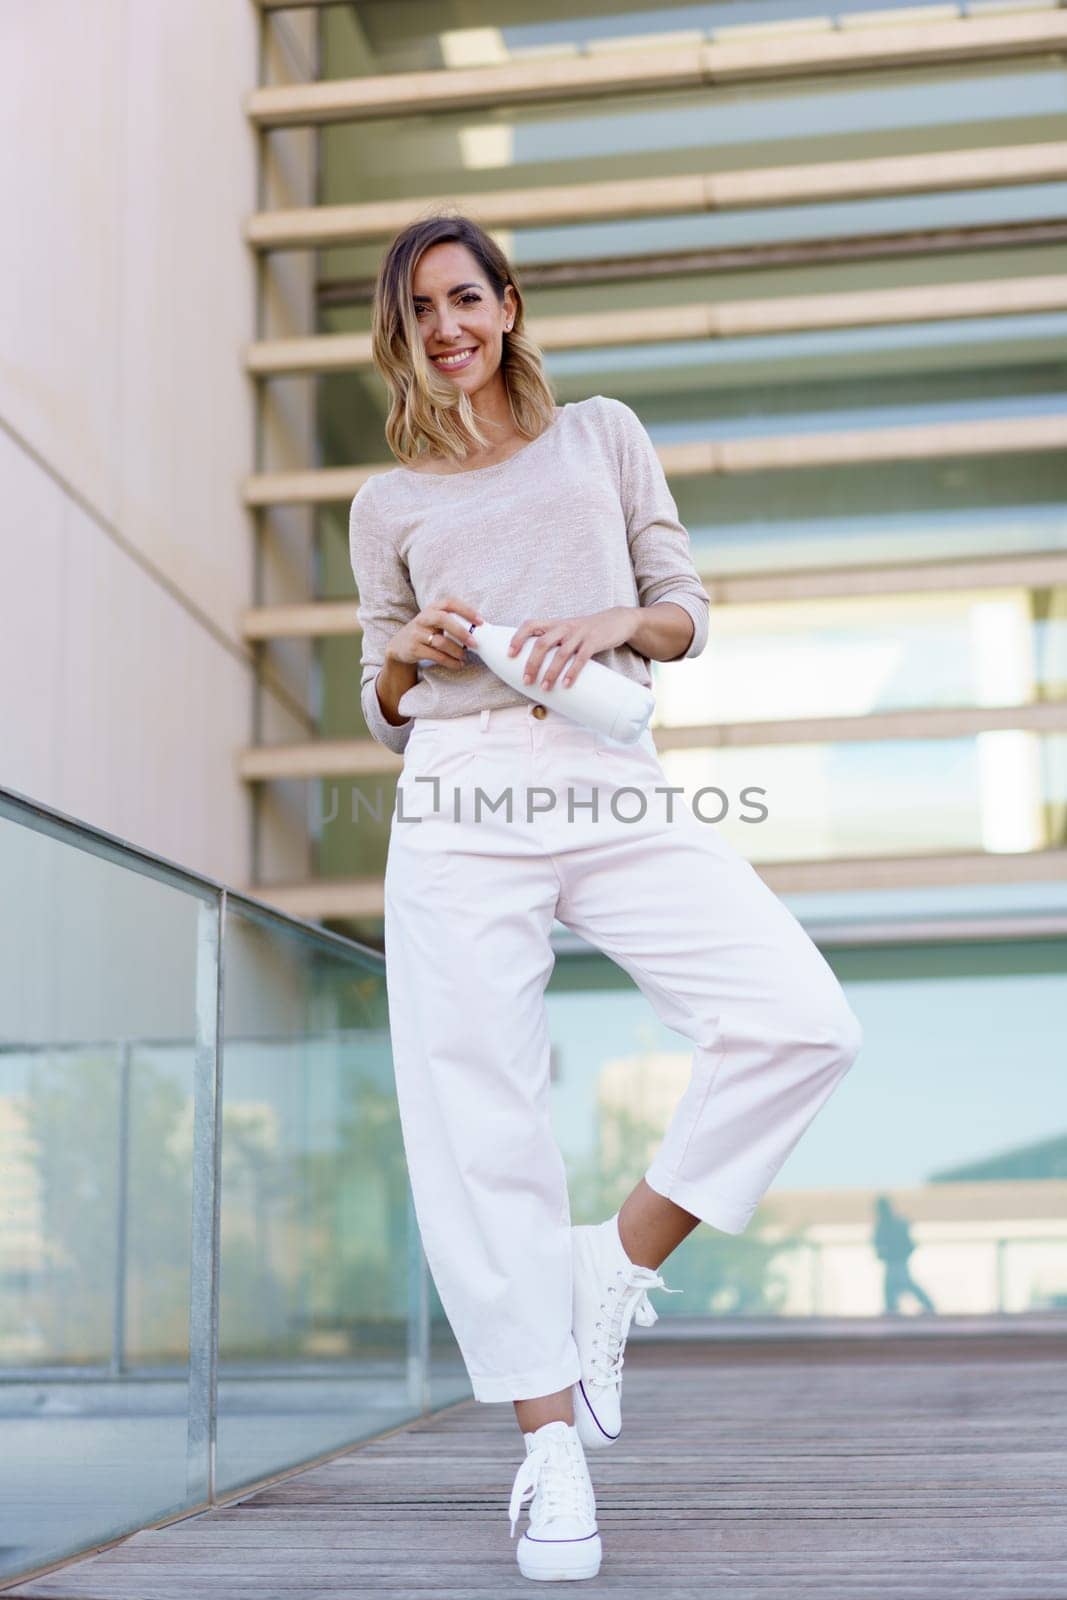 Full body happy female in stylish clothes, looking at camera with smile and opening bottle of water while balancing on one leg on path outside modern building